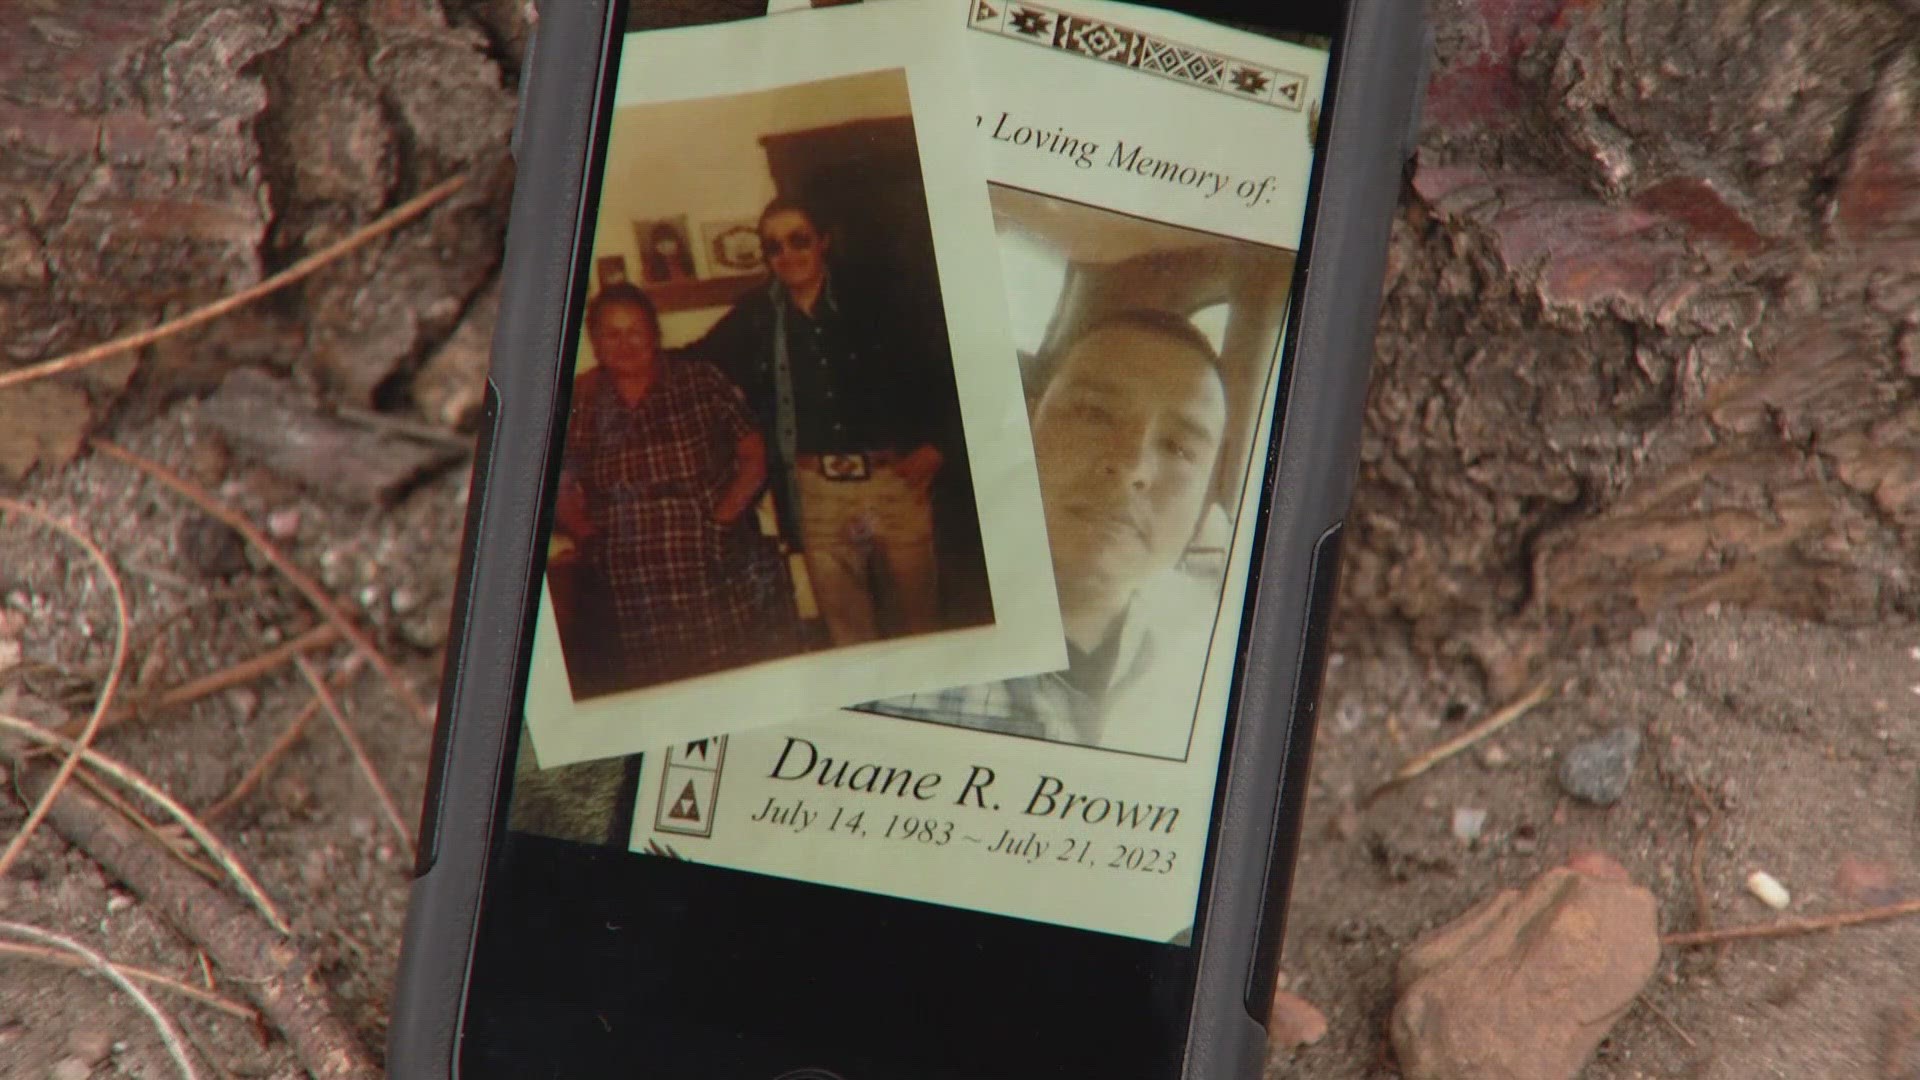 Duane Brown was stabbed to death at a gas station in Fort Collins in July of this year.